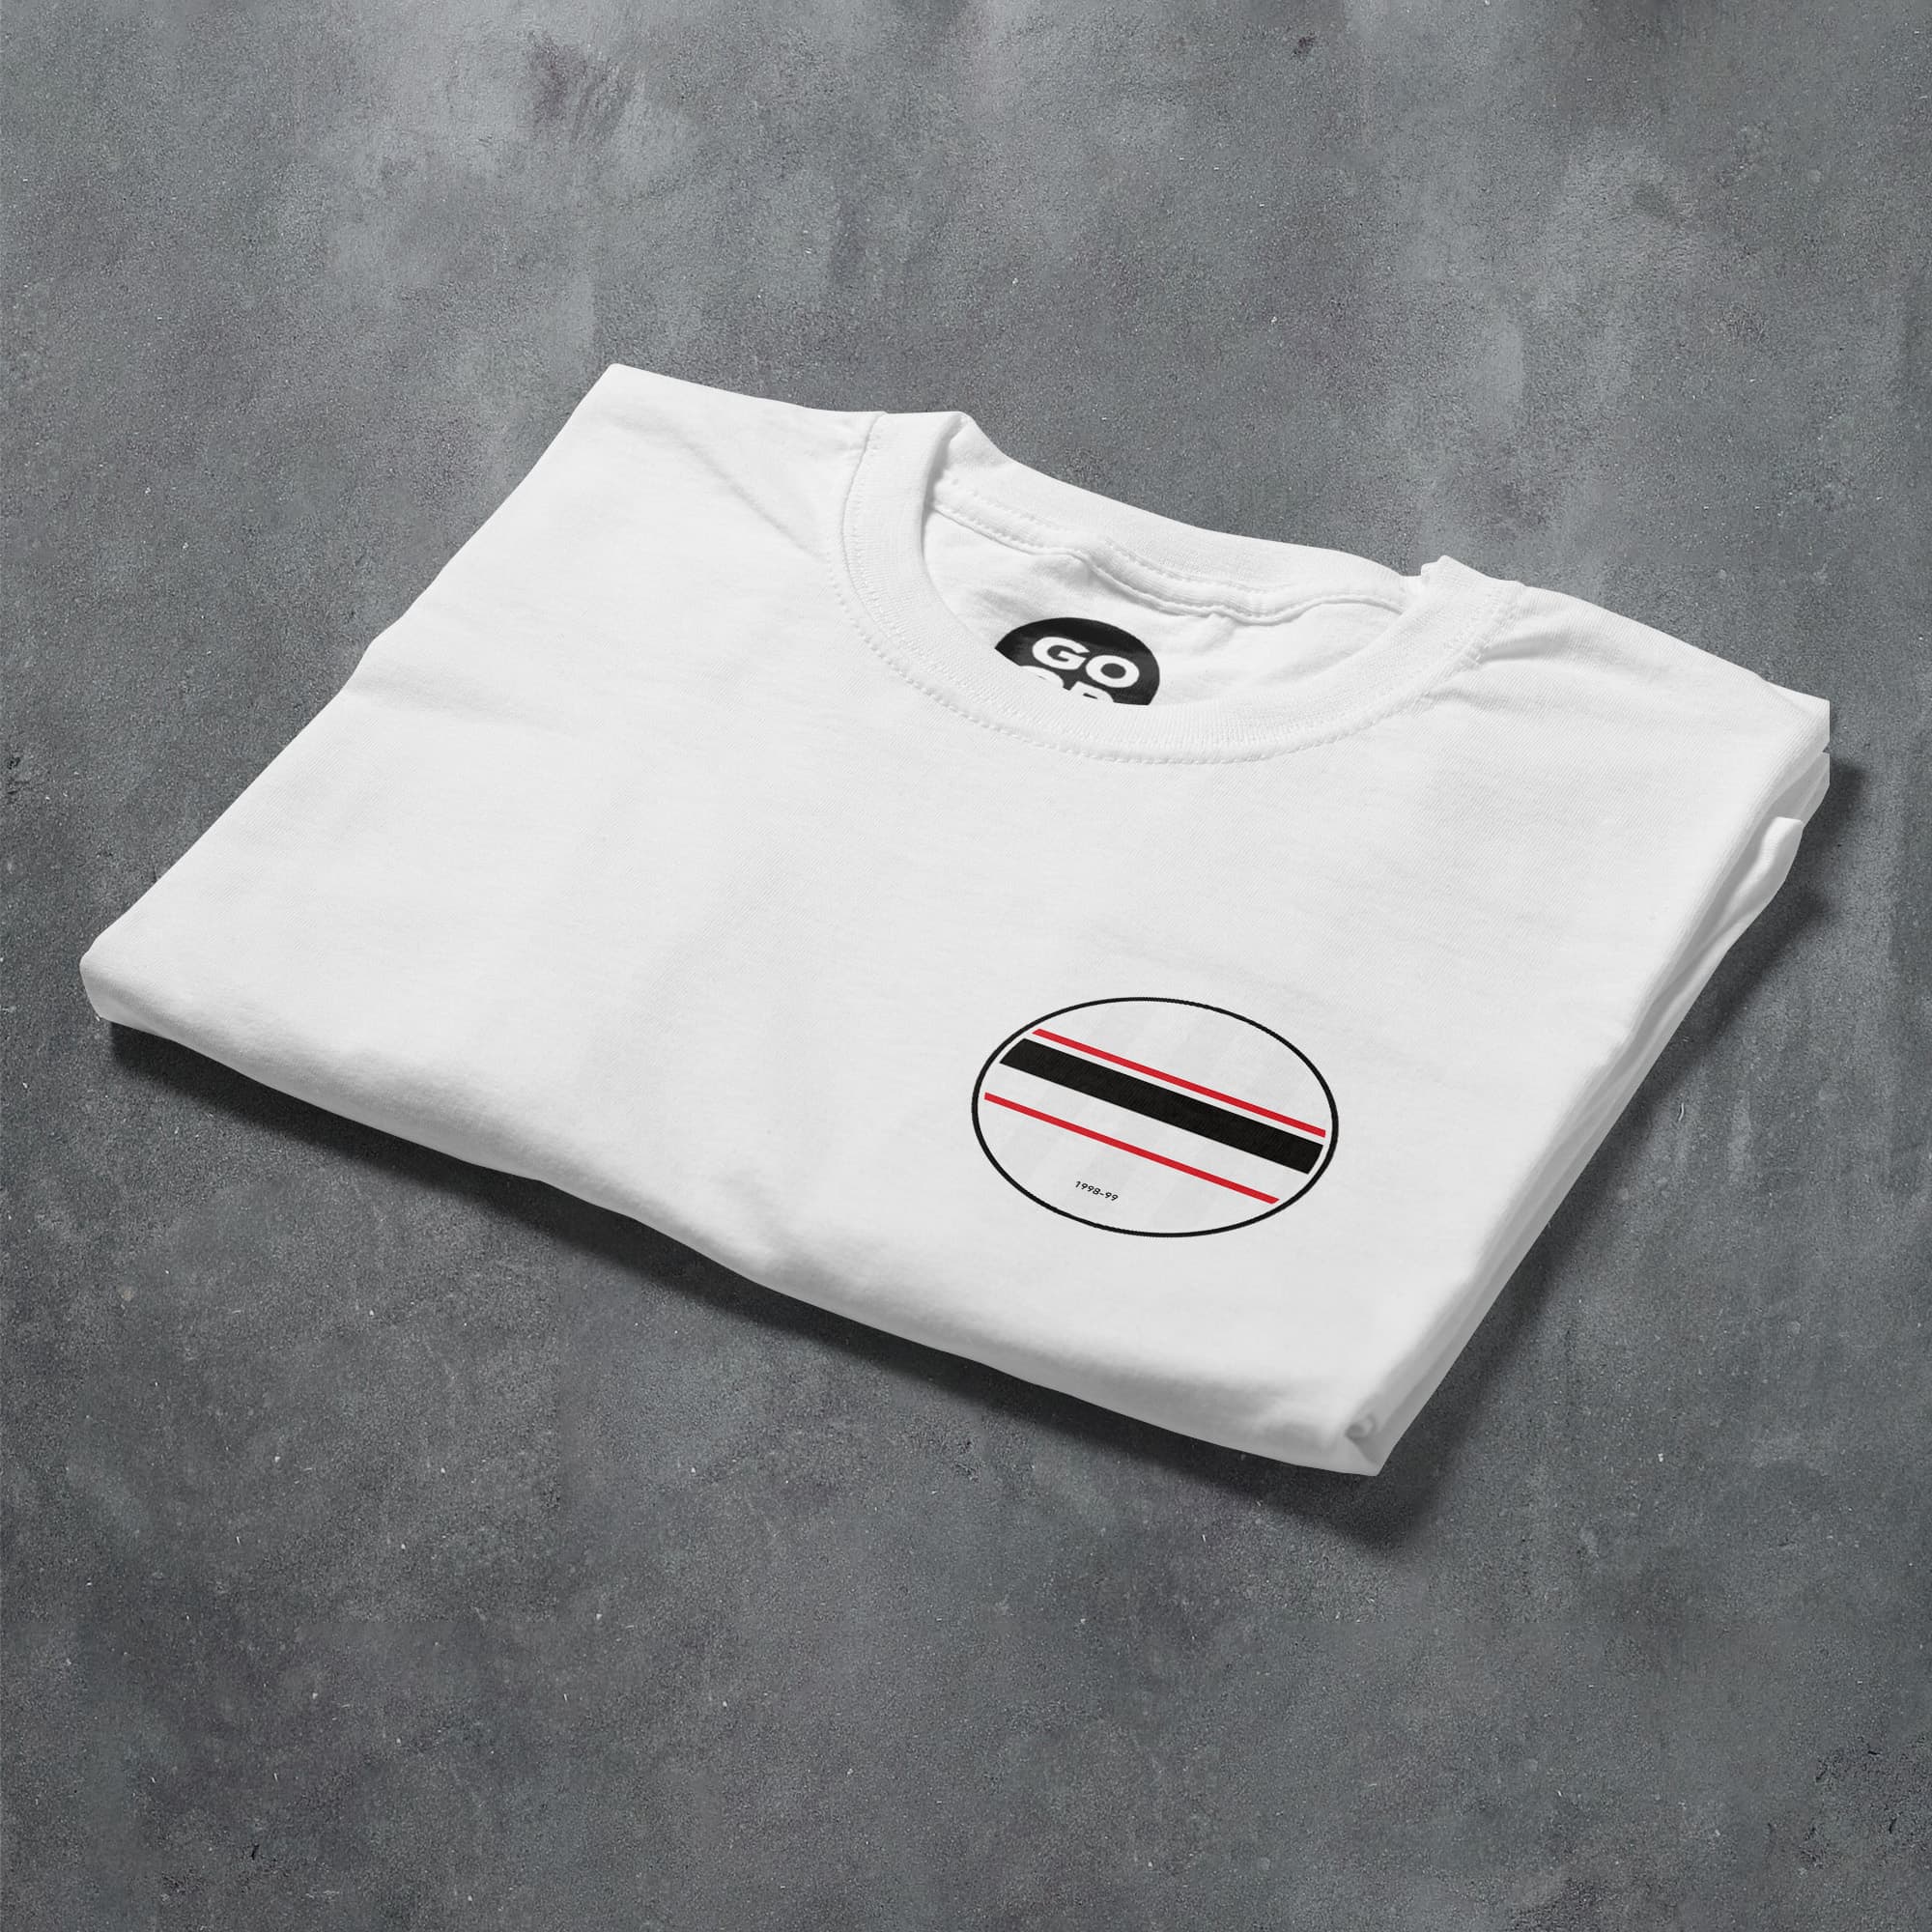 a white t - shirt with a black and red stripe on it